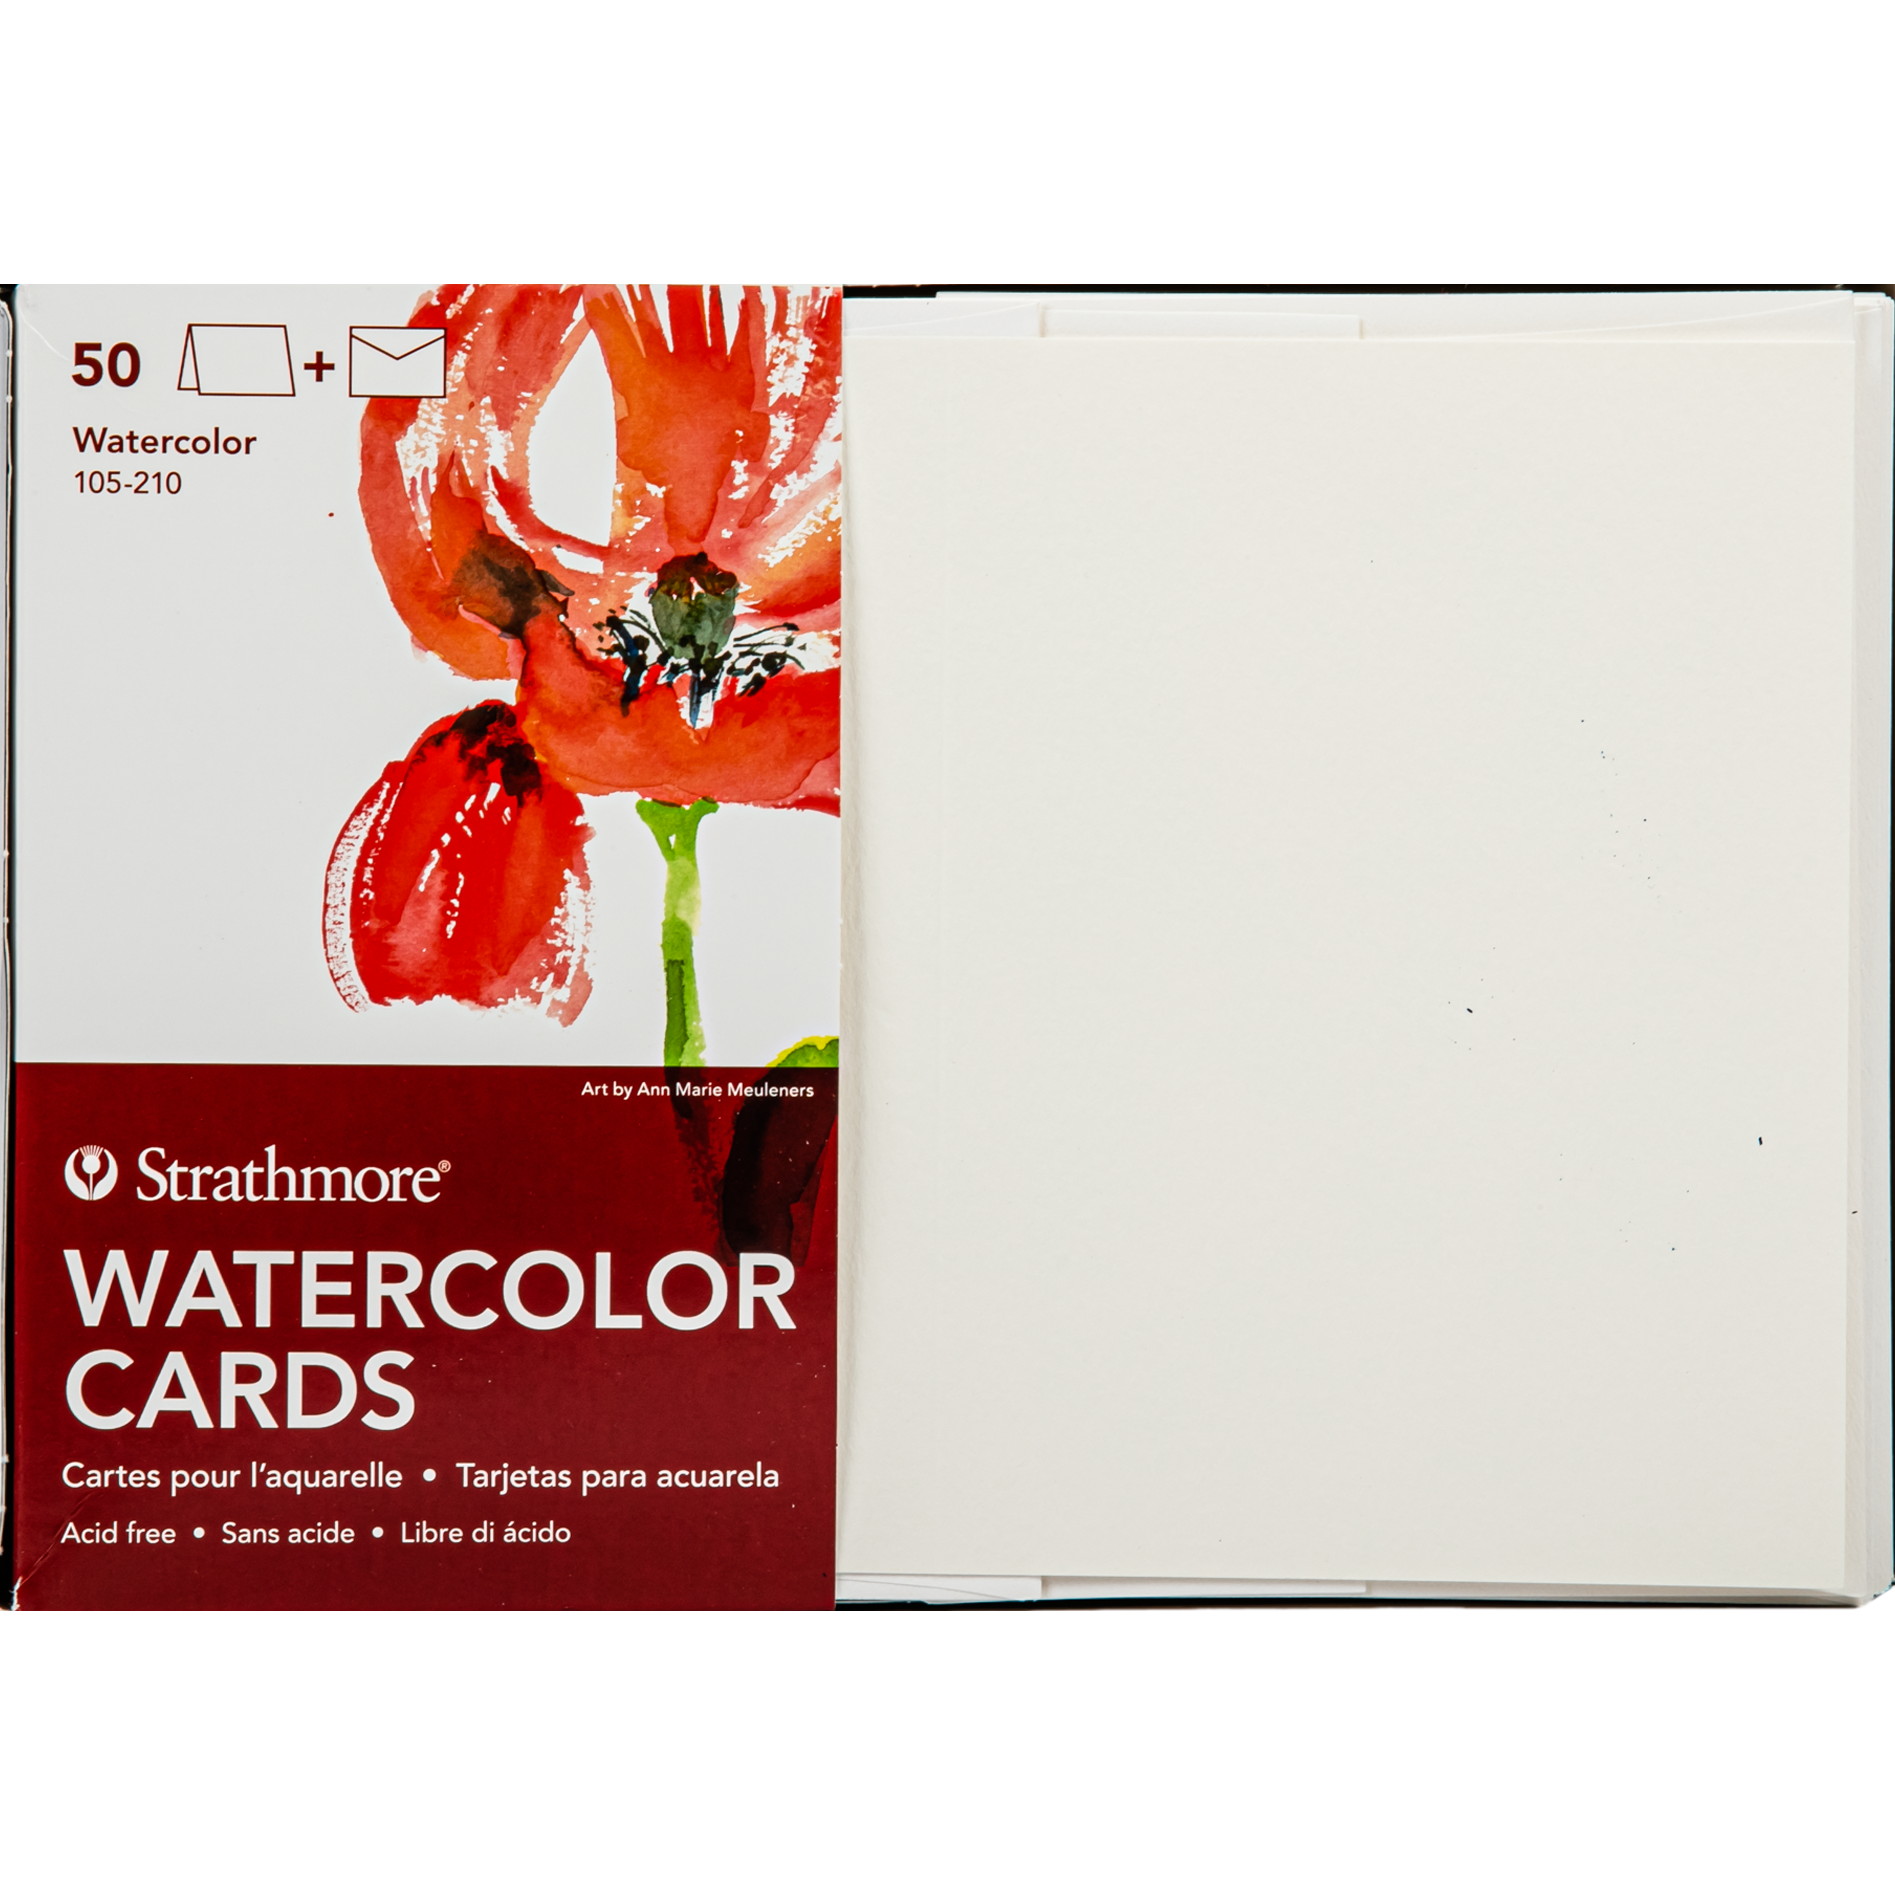 Get the best price on Strathmore Cards & Envelopes 5X6.875 50/Pkg -  Watercolor 956